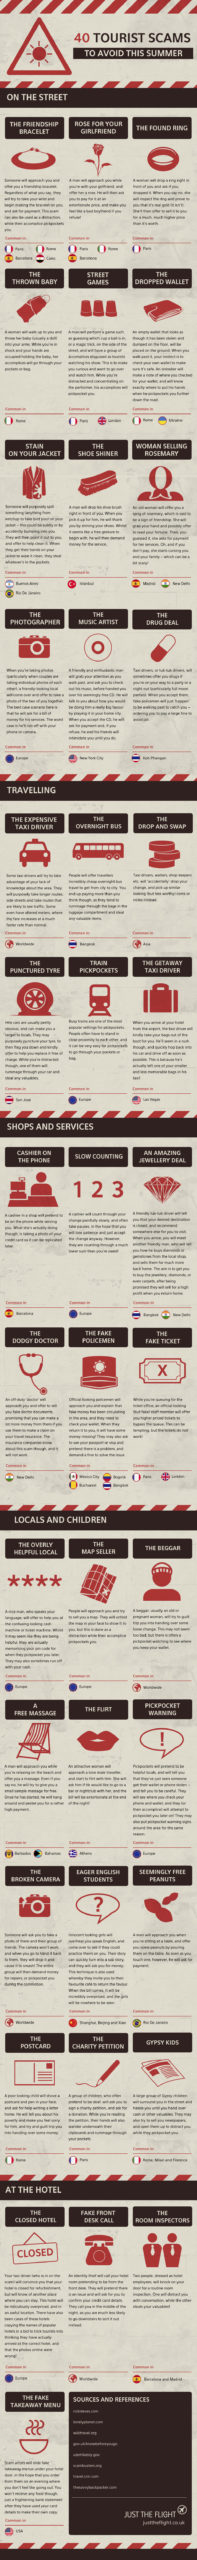 This Infographic Breaks Down The Most Common Travel Scams By Country